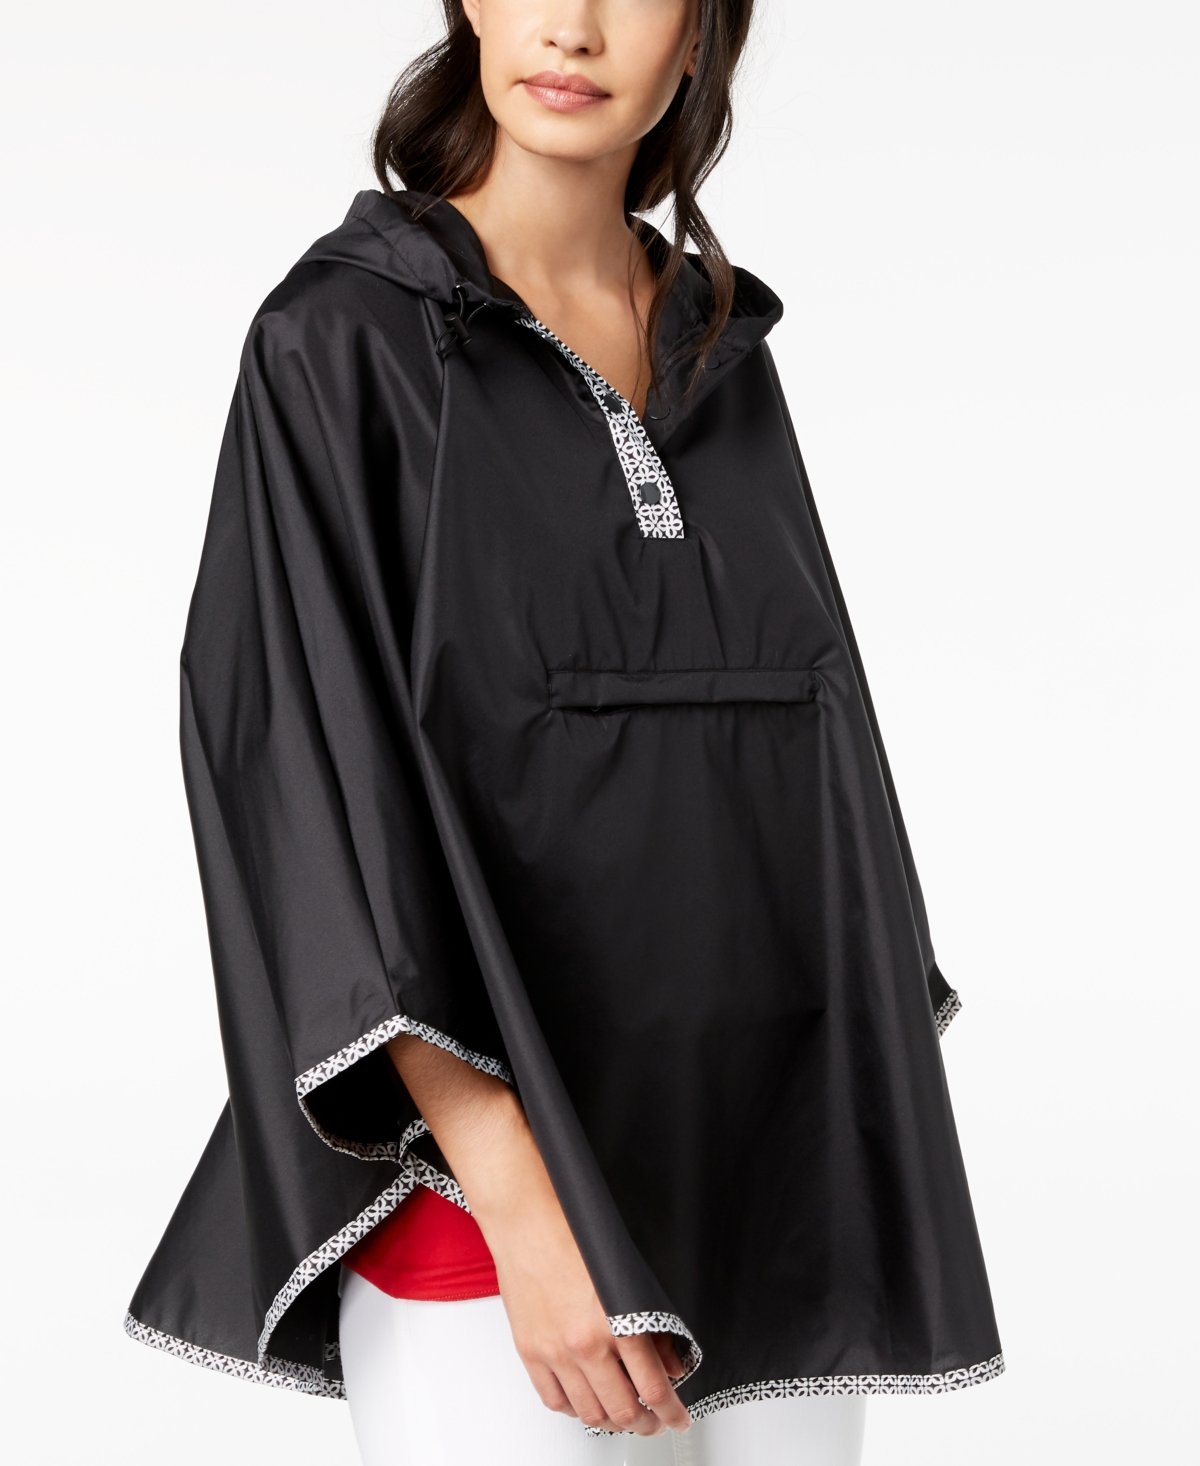 Women's Water-Repellent Pack-able Rain Poncho - Black